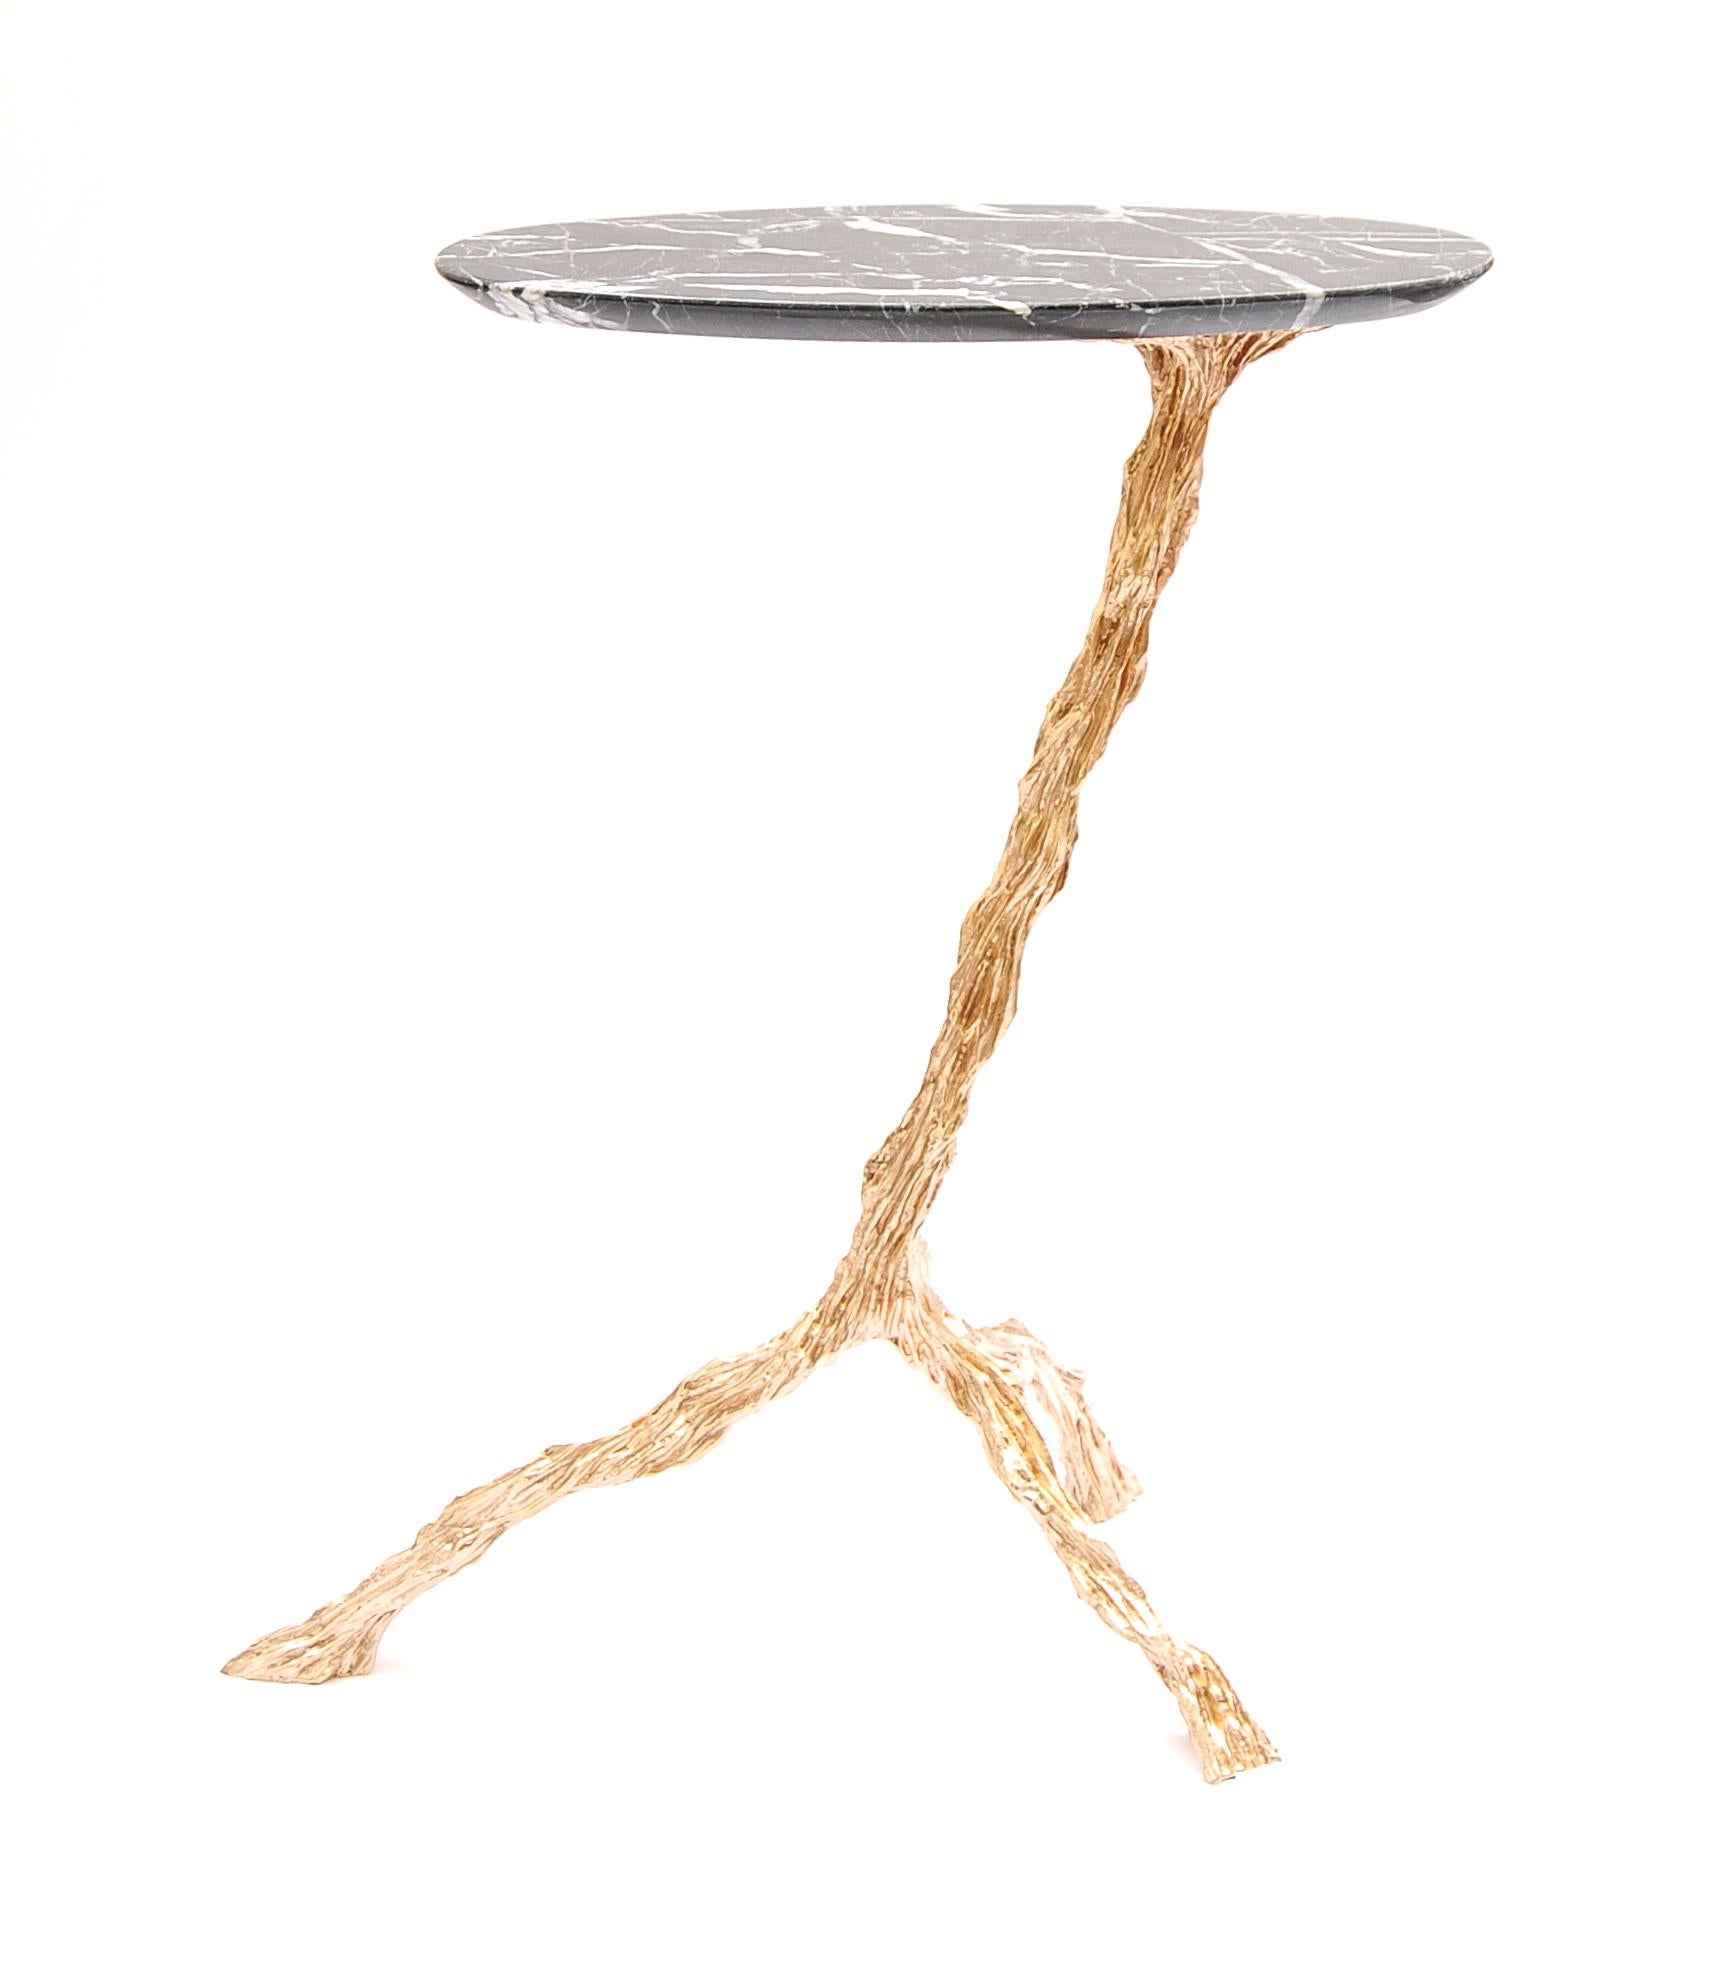 Brazilian Pancho Drink Table with Nero Marquina Marble Top by Fakasaka Design For Sale